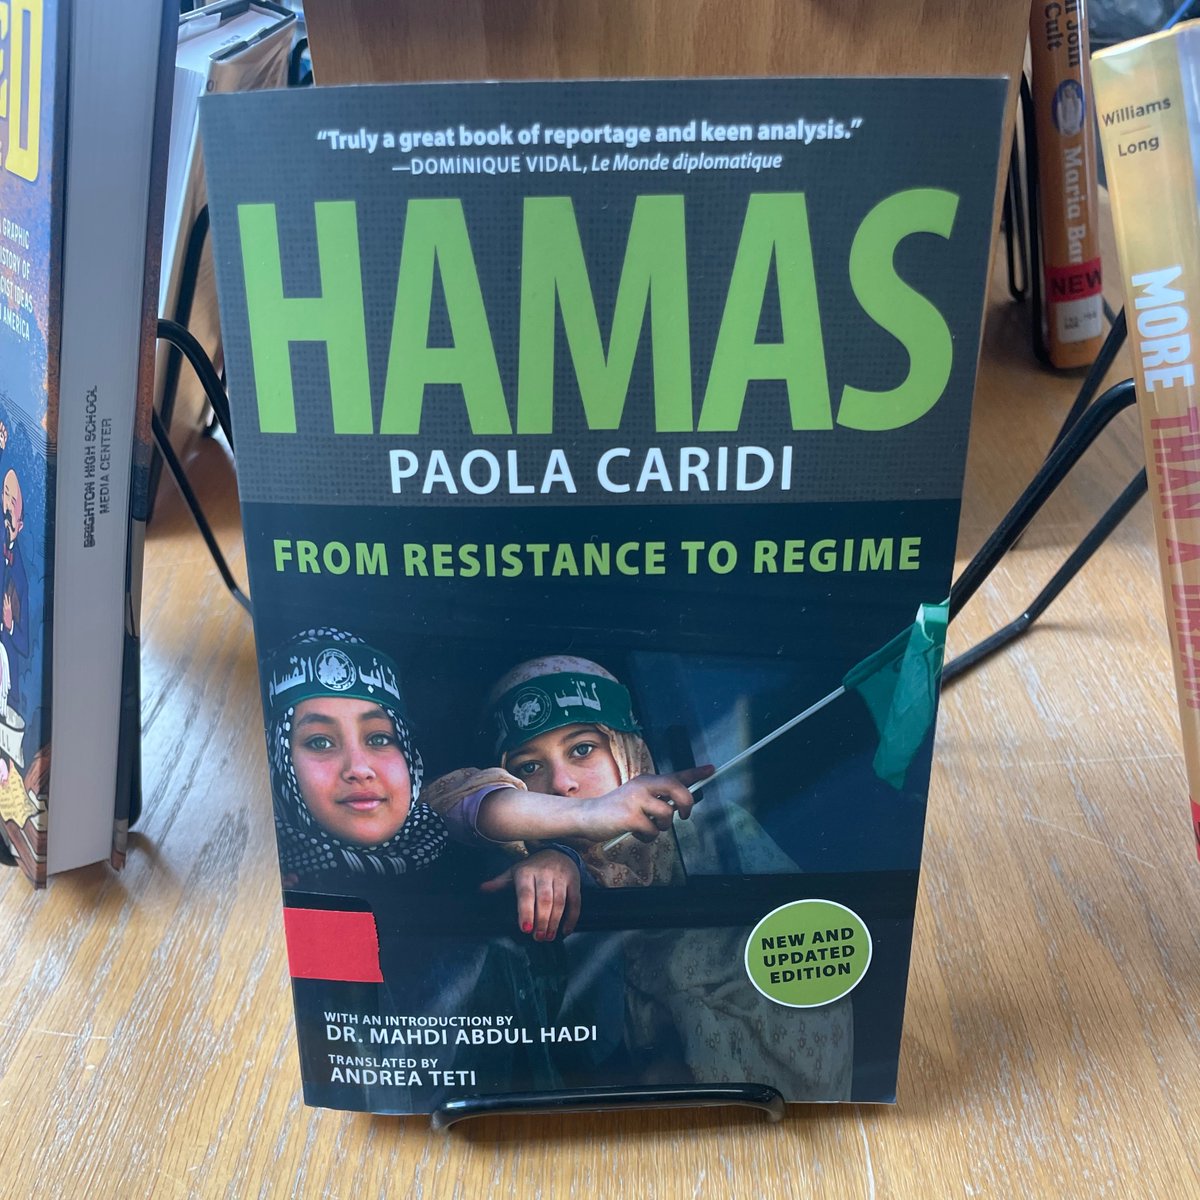 Brighten High School (Rochester, NY) - shocking pro Hamas propaganda spotted in the school library. Public info for Superintendent of Schools Dr. Kevin McGowan 242-5200 x5502 - voice concerns.